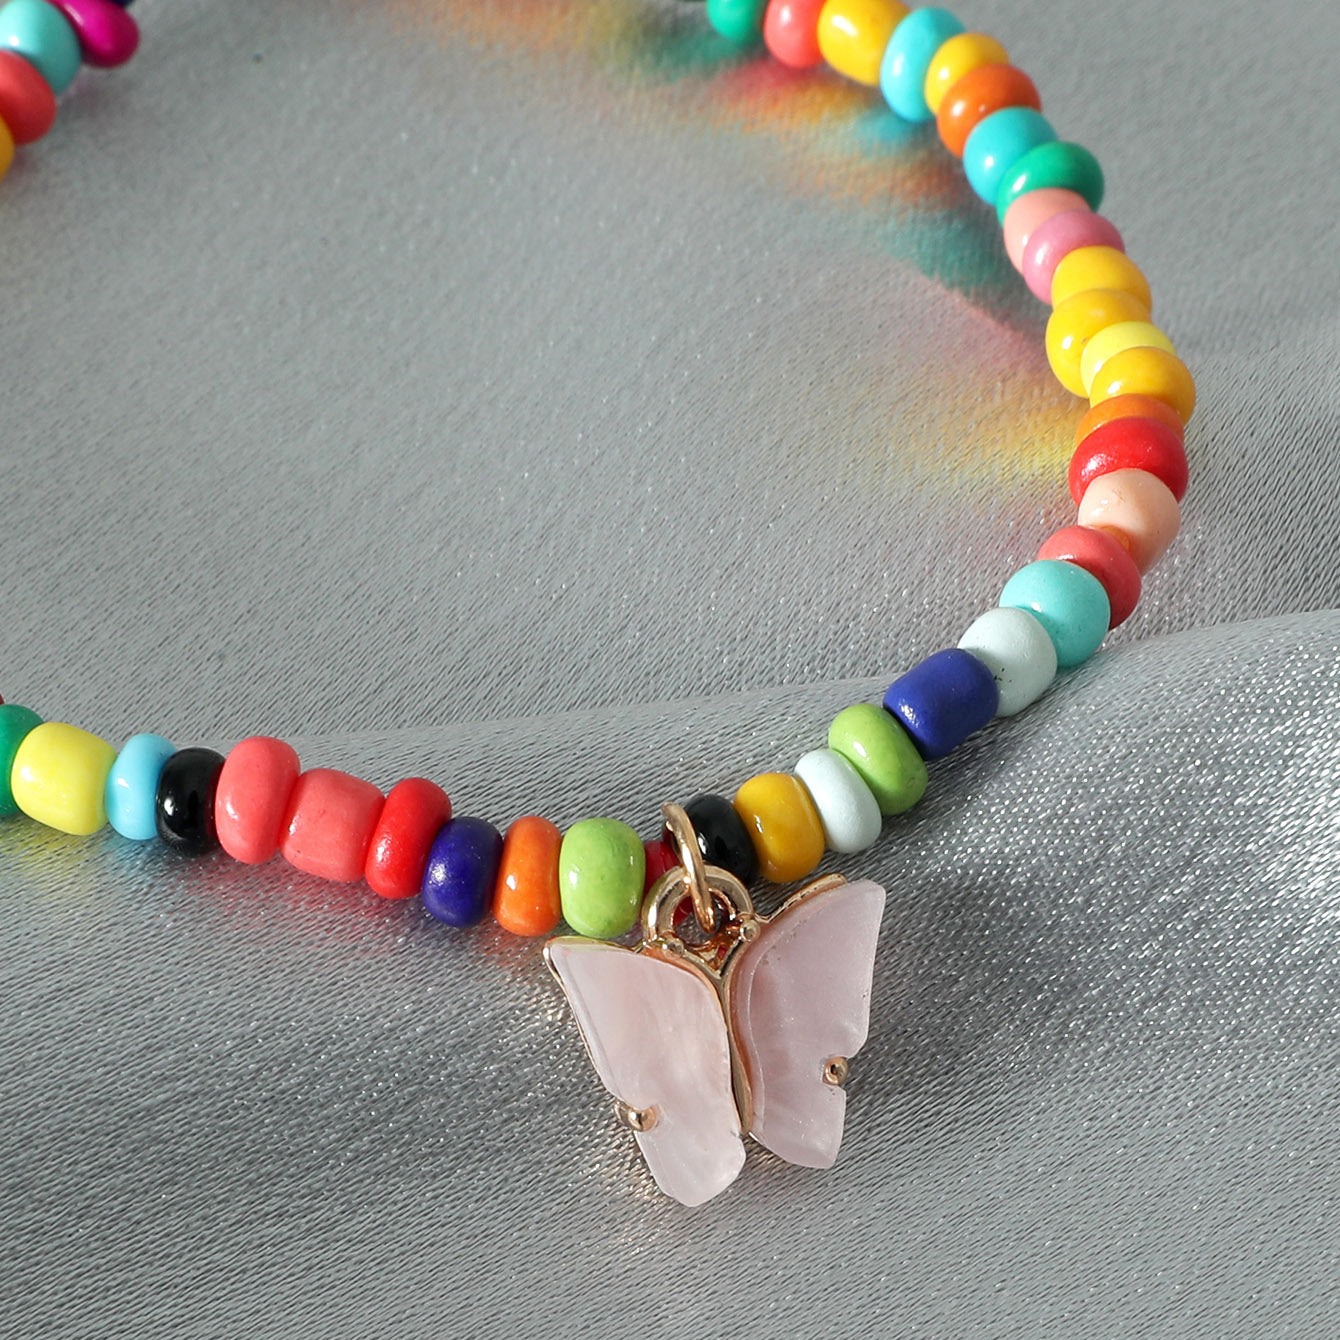 Exquisite personality colored beads with bohemian style butterfly bead design anklet - Syble's